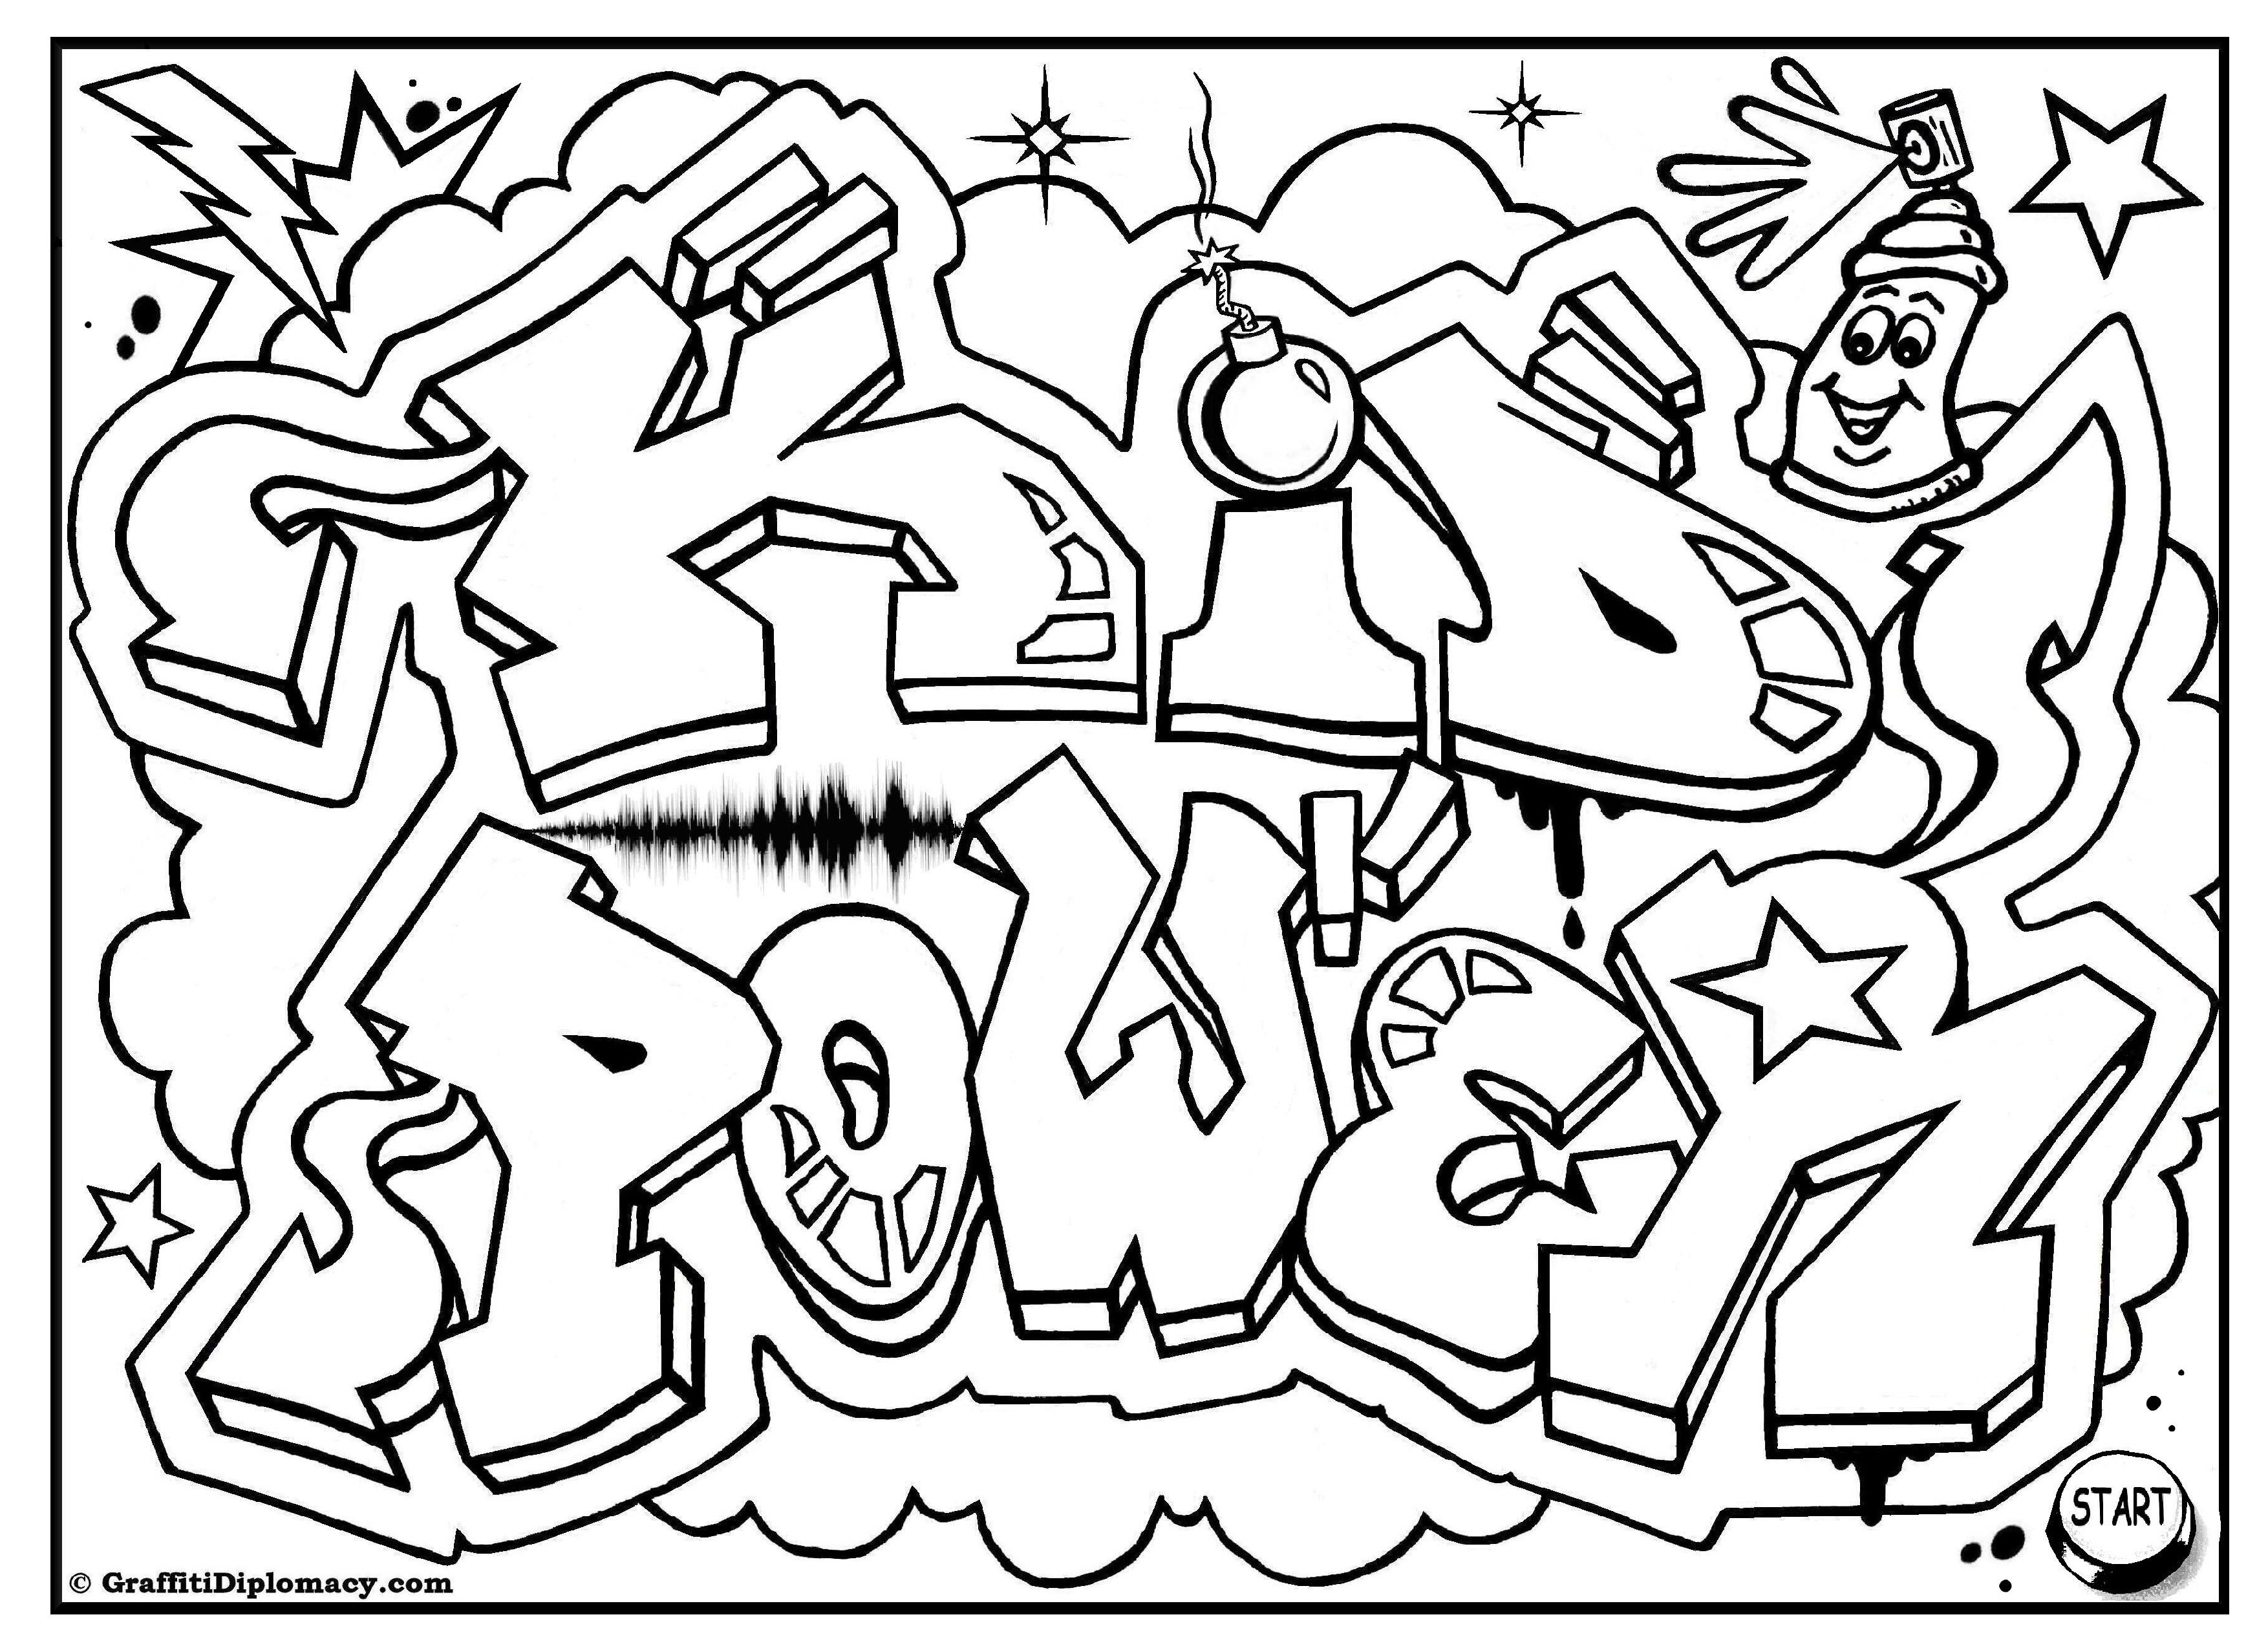 Kid power free graffiti coloring page free printable colouring sheet coloring book art book art cool coloring pages